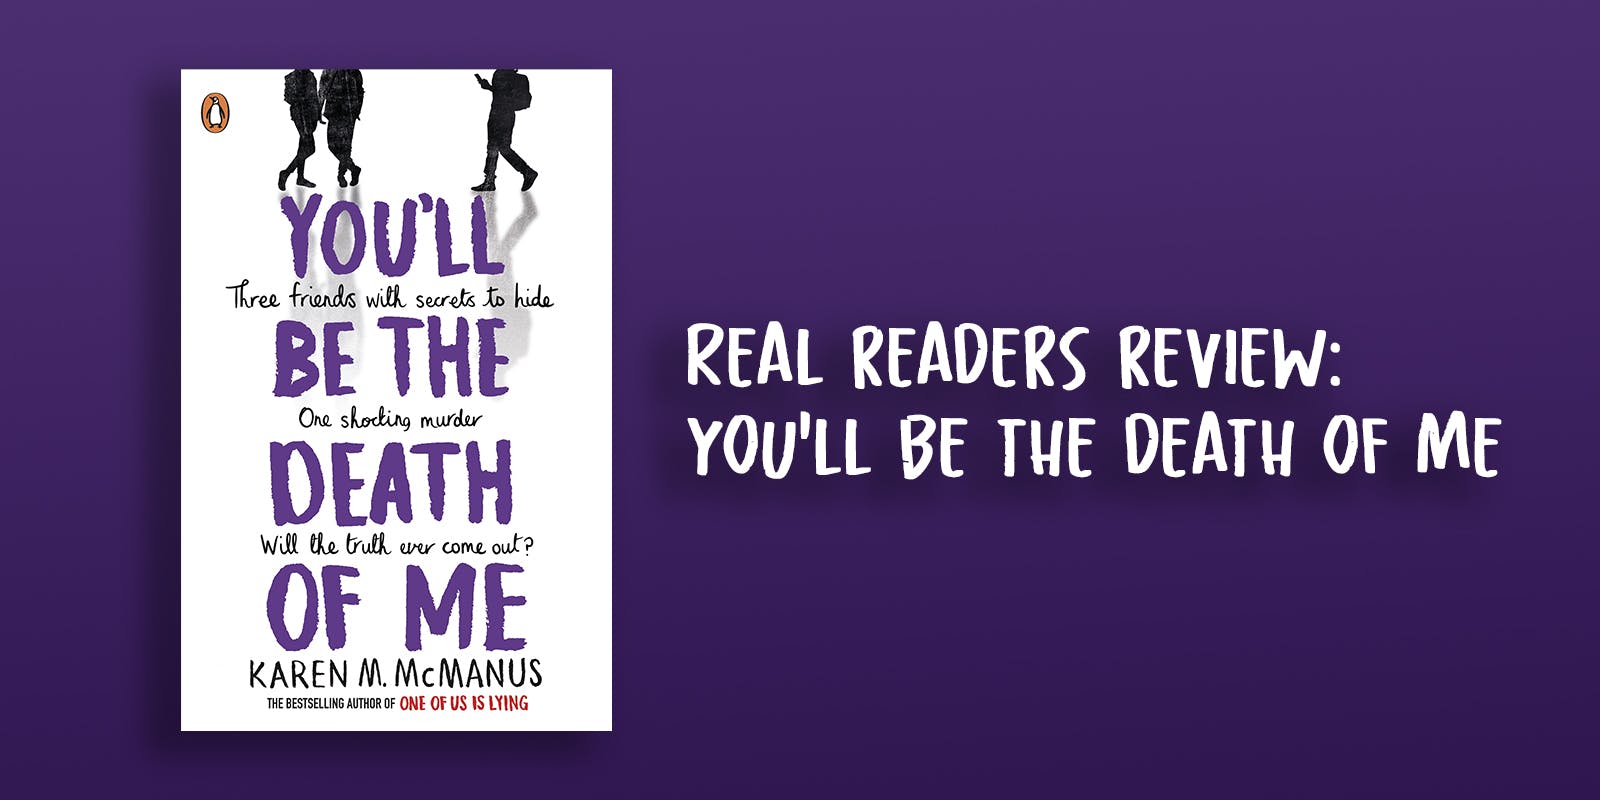 Real readers review: You'll Be The Death of Me